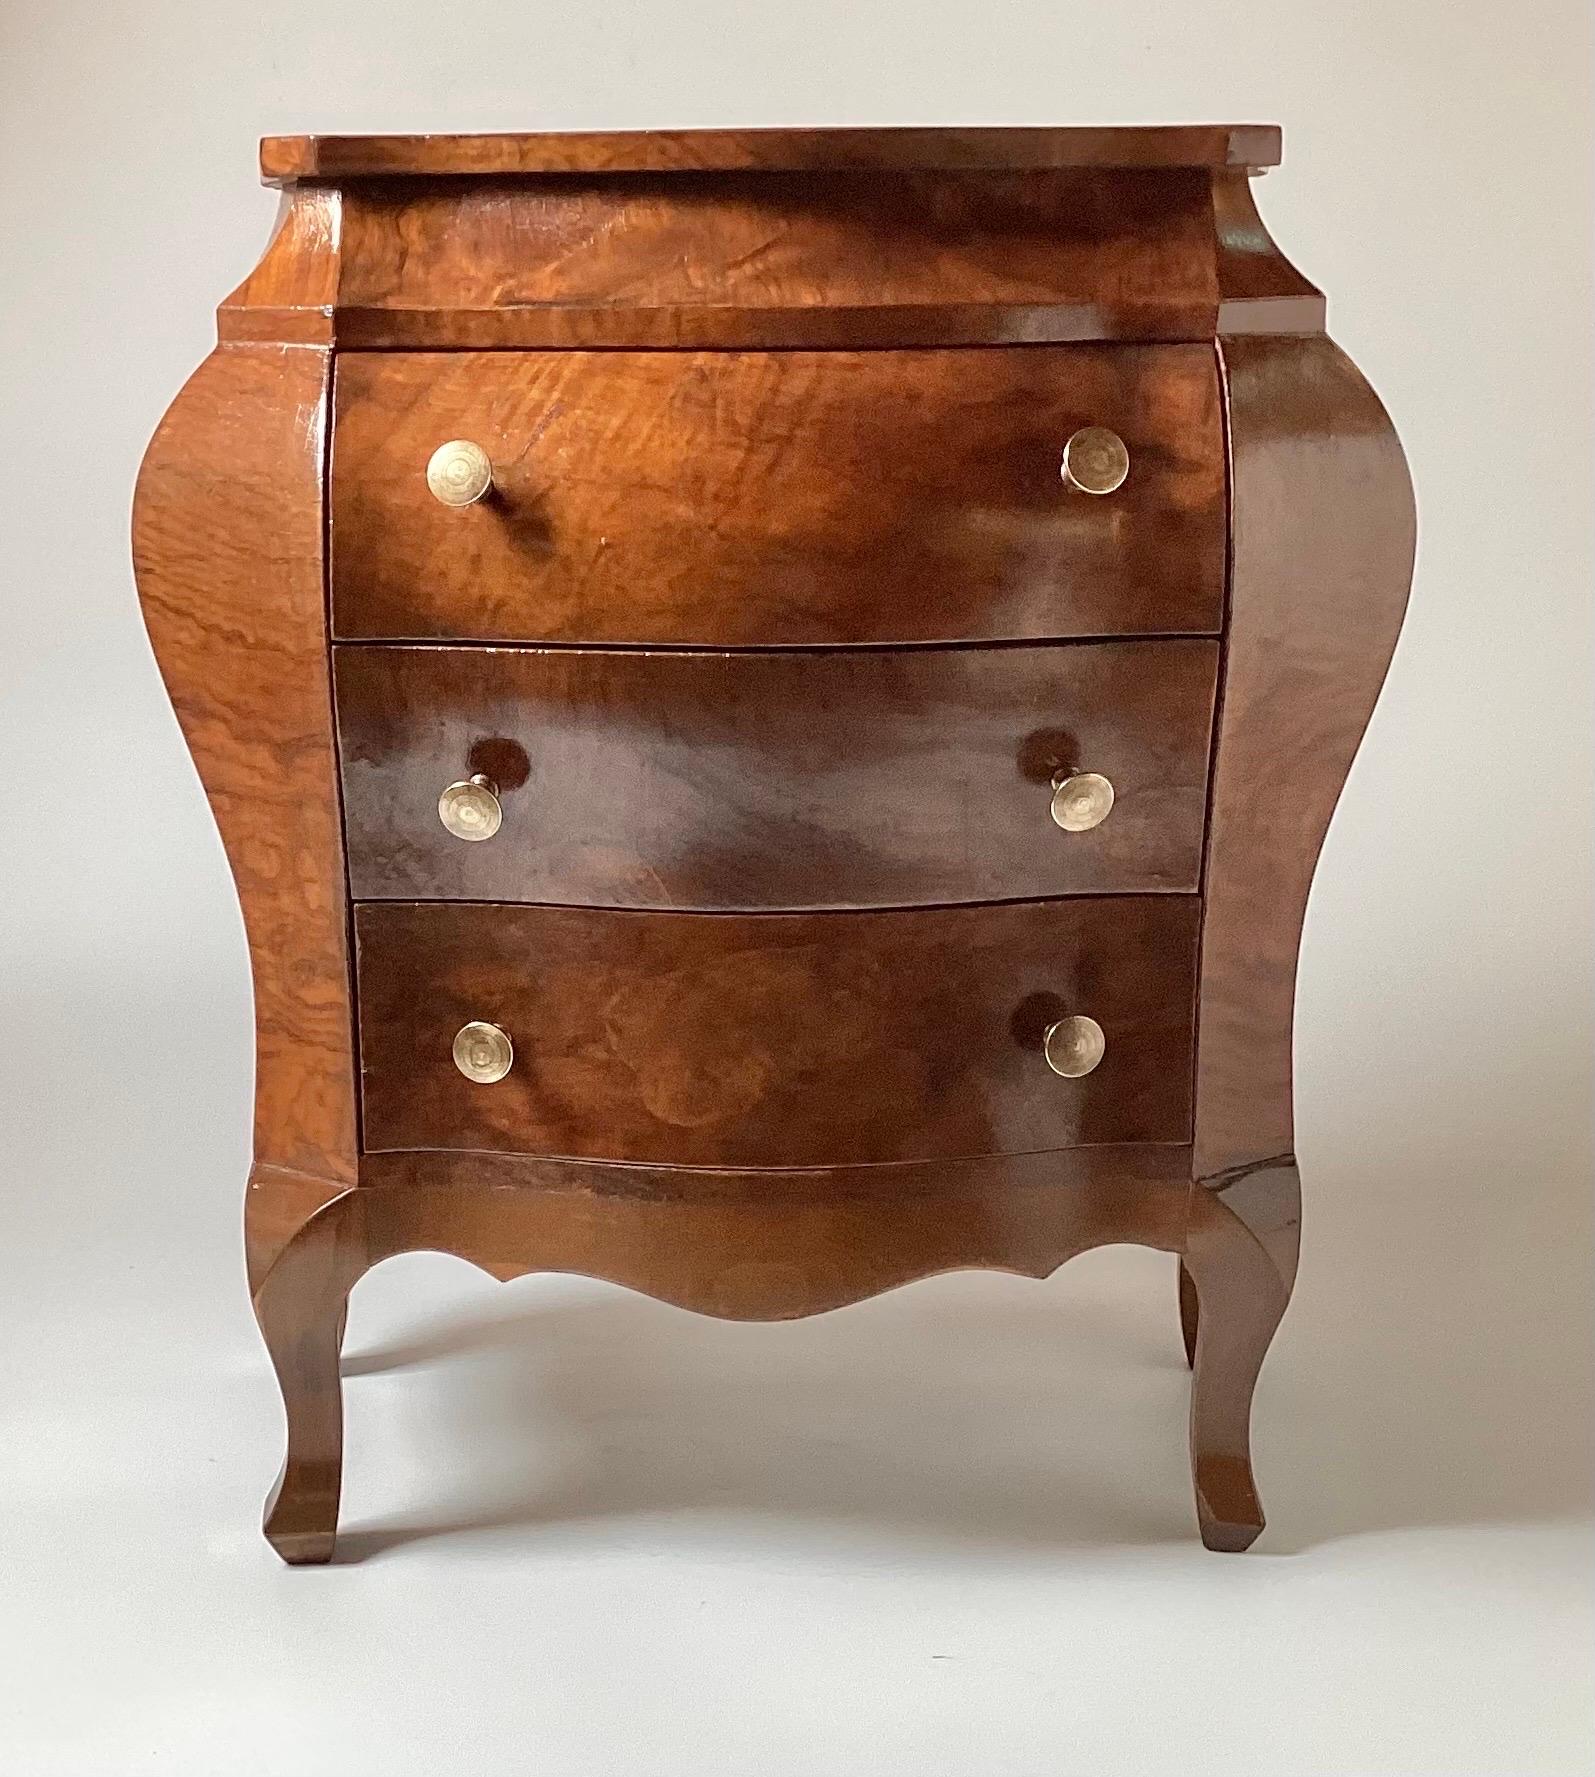 A diminutive walnut bombe chest made in Italy, mid 20th century. The figurative grain with three shapely drawers and brass handles with a recent French Polish. Perfect accent piece 20.5 inches tall, 18 inches wide, 10 inches deep.